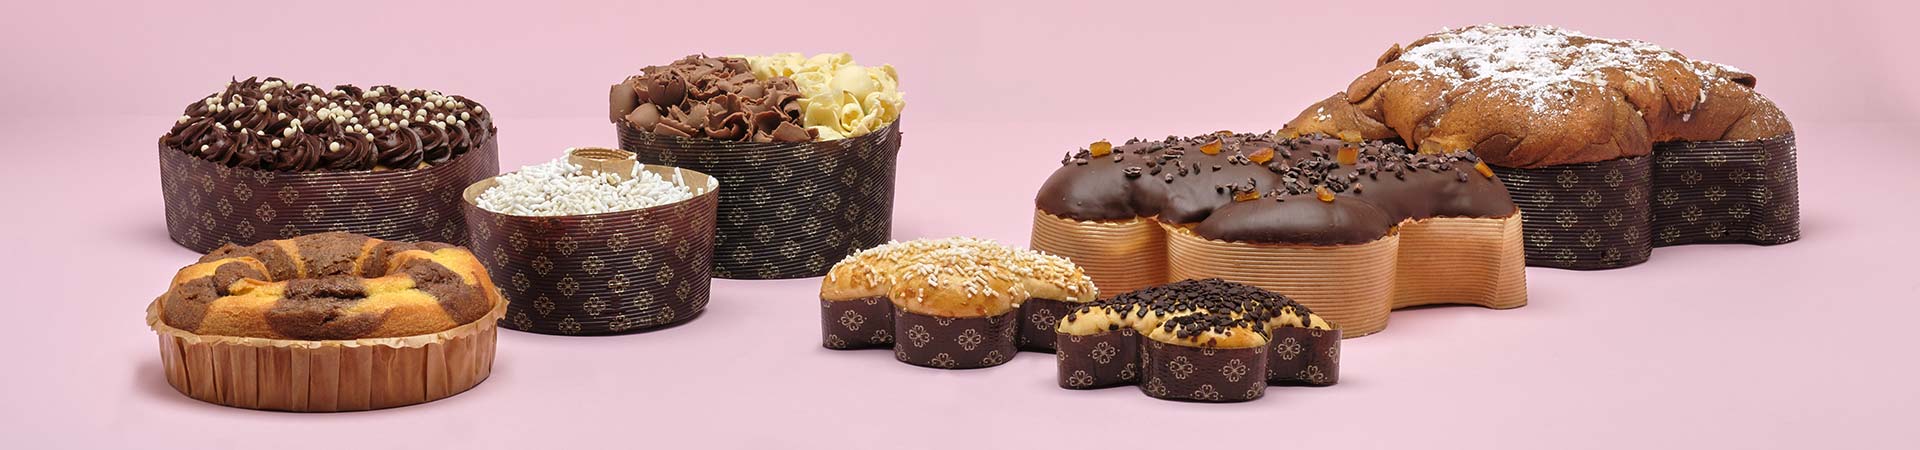 Colomba and Ring Cakes baking molds